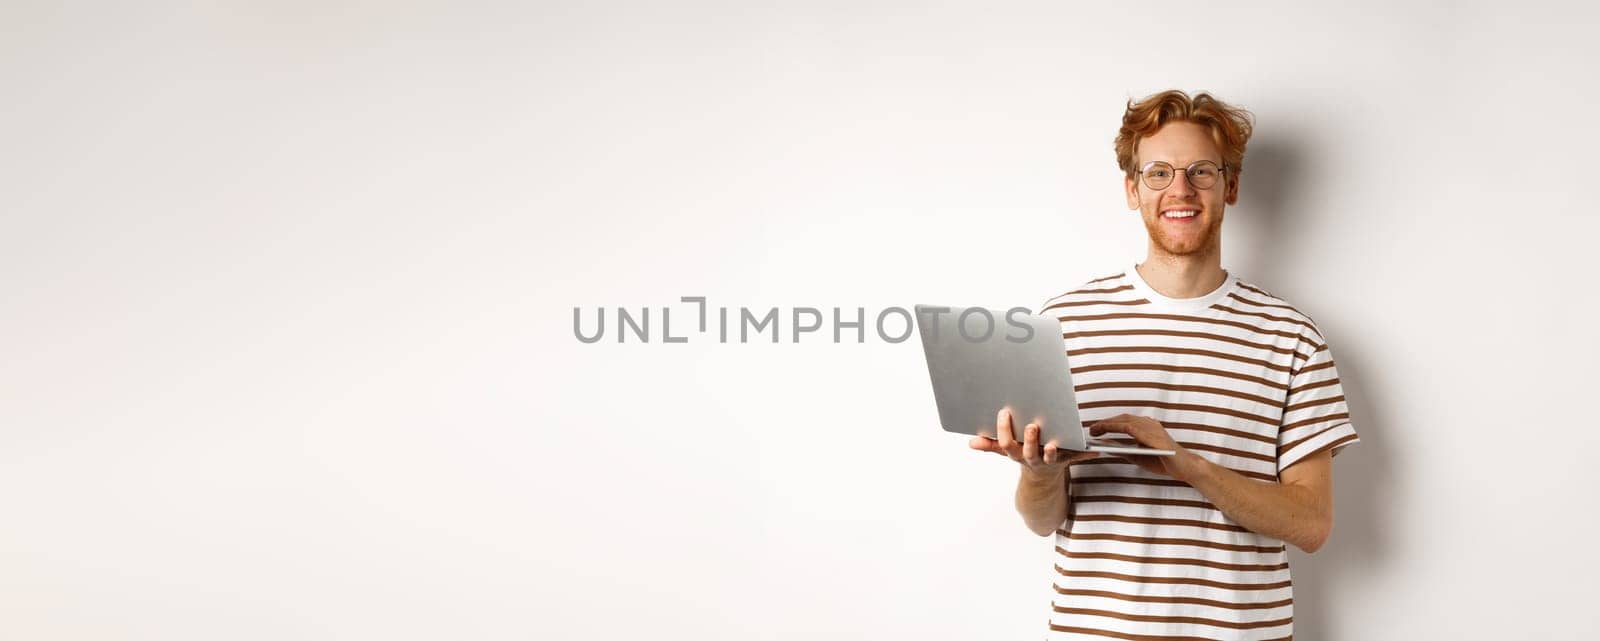 Smiling young man working on laptop and looking joyful, standing over white background.